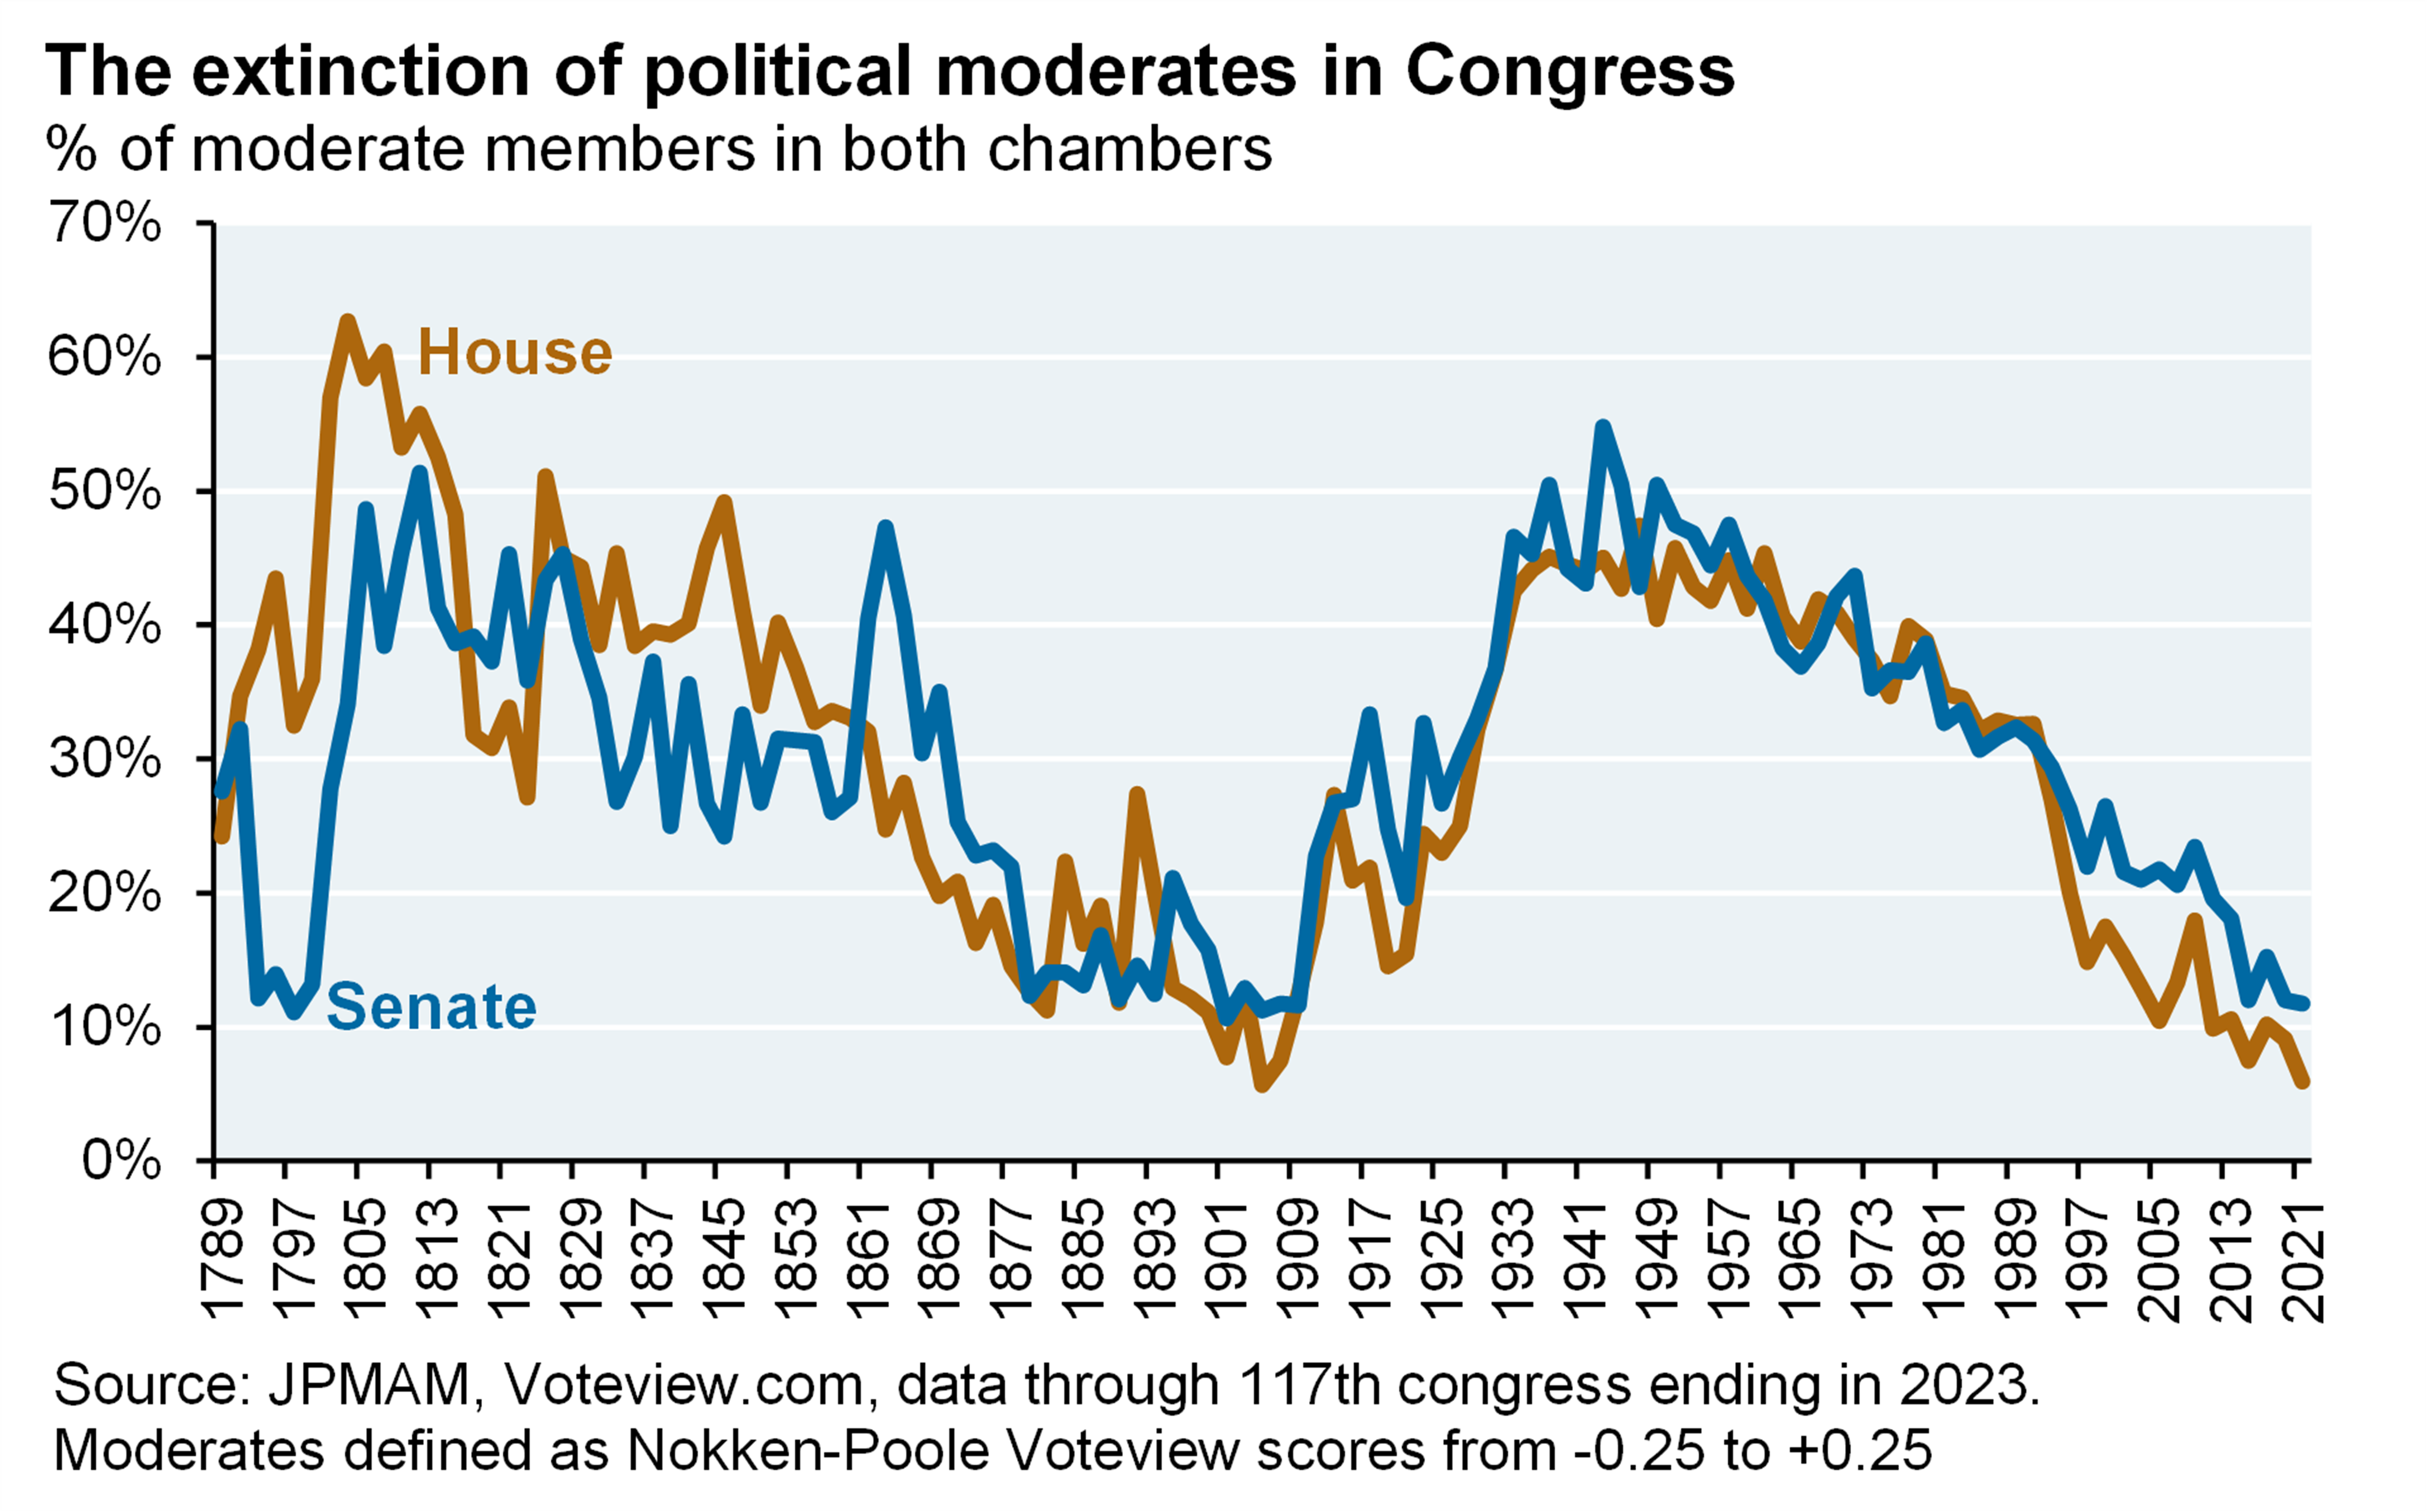 Line chart showing the decline in political moderates in the Senate and the House over time